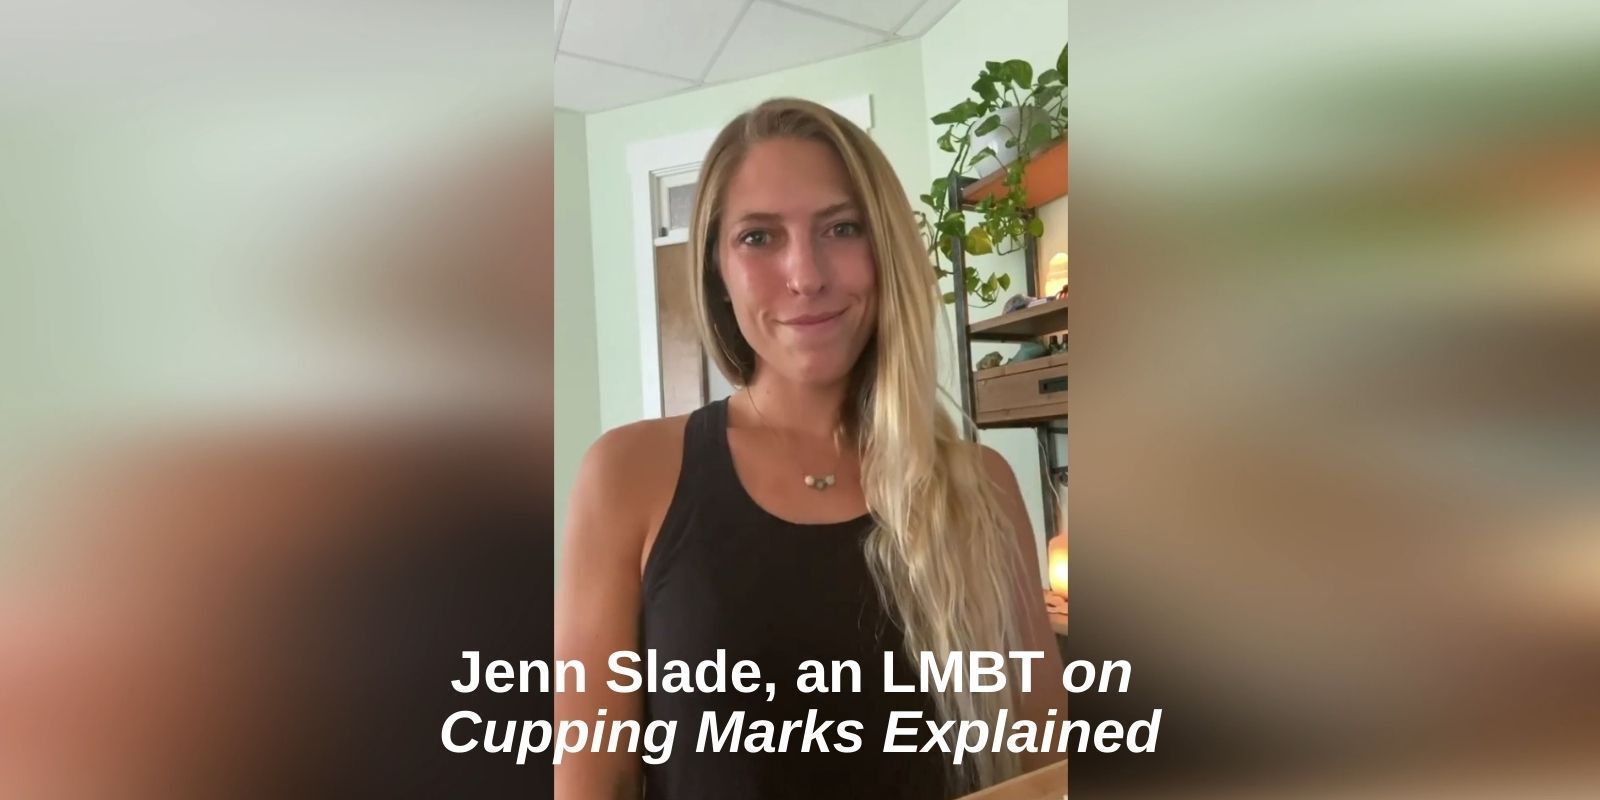 GO CUP YOURSELF Part 4: Cupping Marks Explained - Lure Essentials